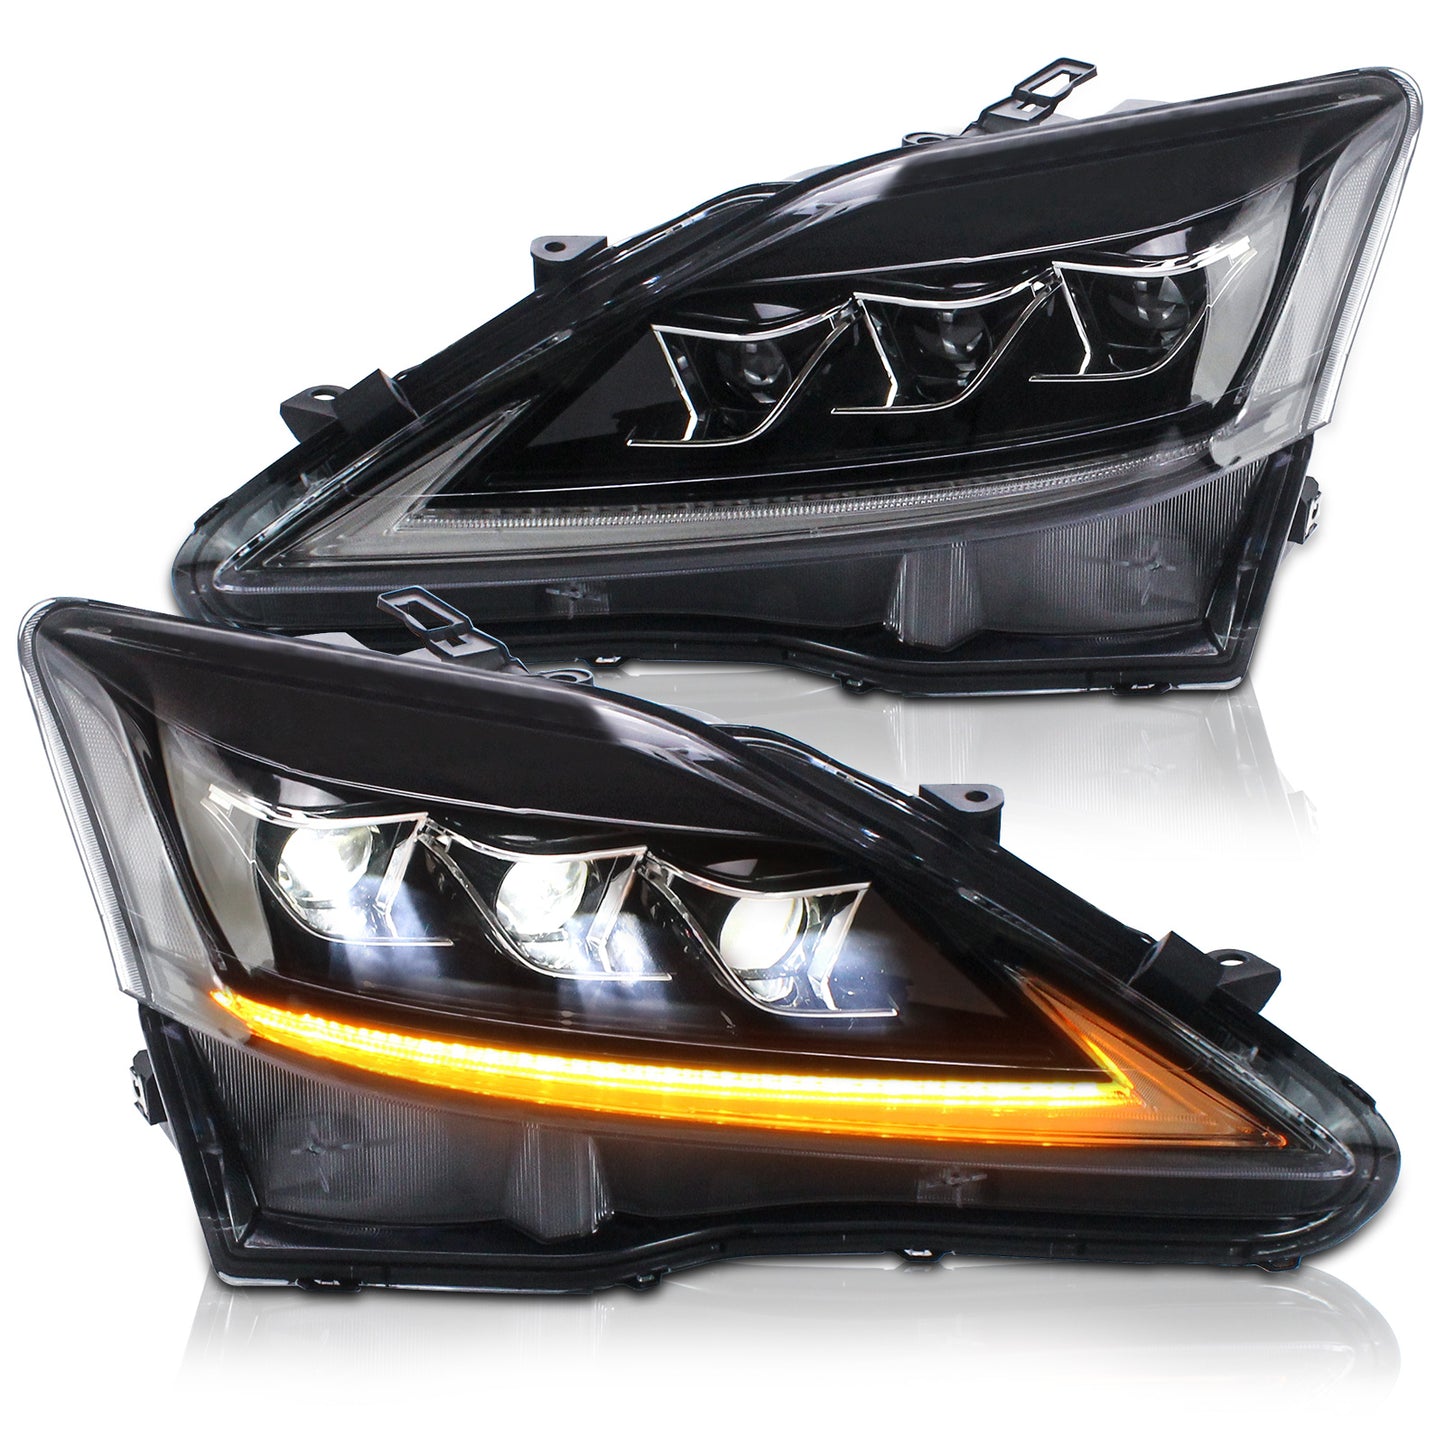 JOLUNG Full LED Headlights Assembly For Lexus IS250/ IS250C/ IS300/ IS350/ ISF 2006-2012